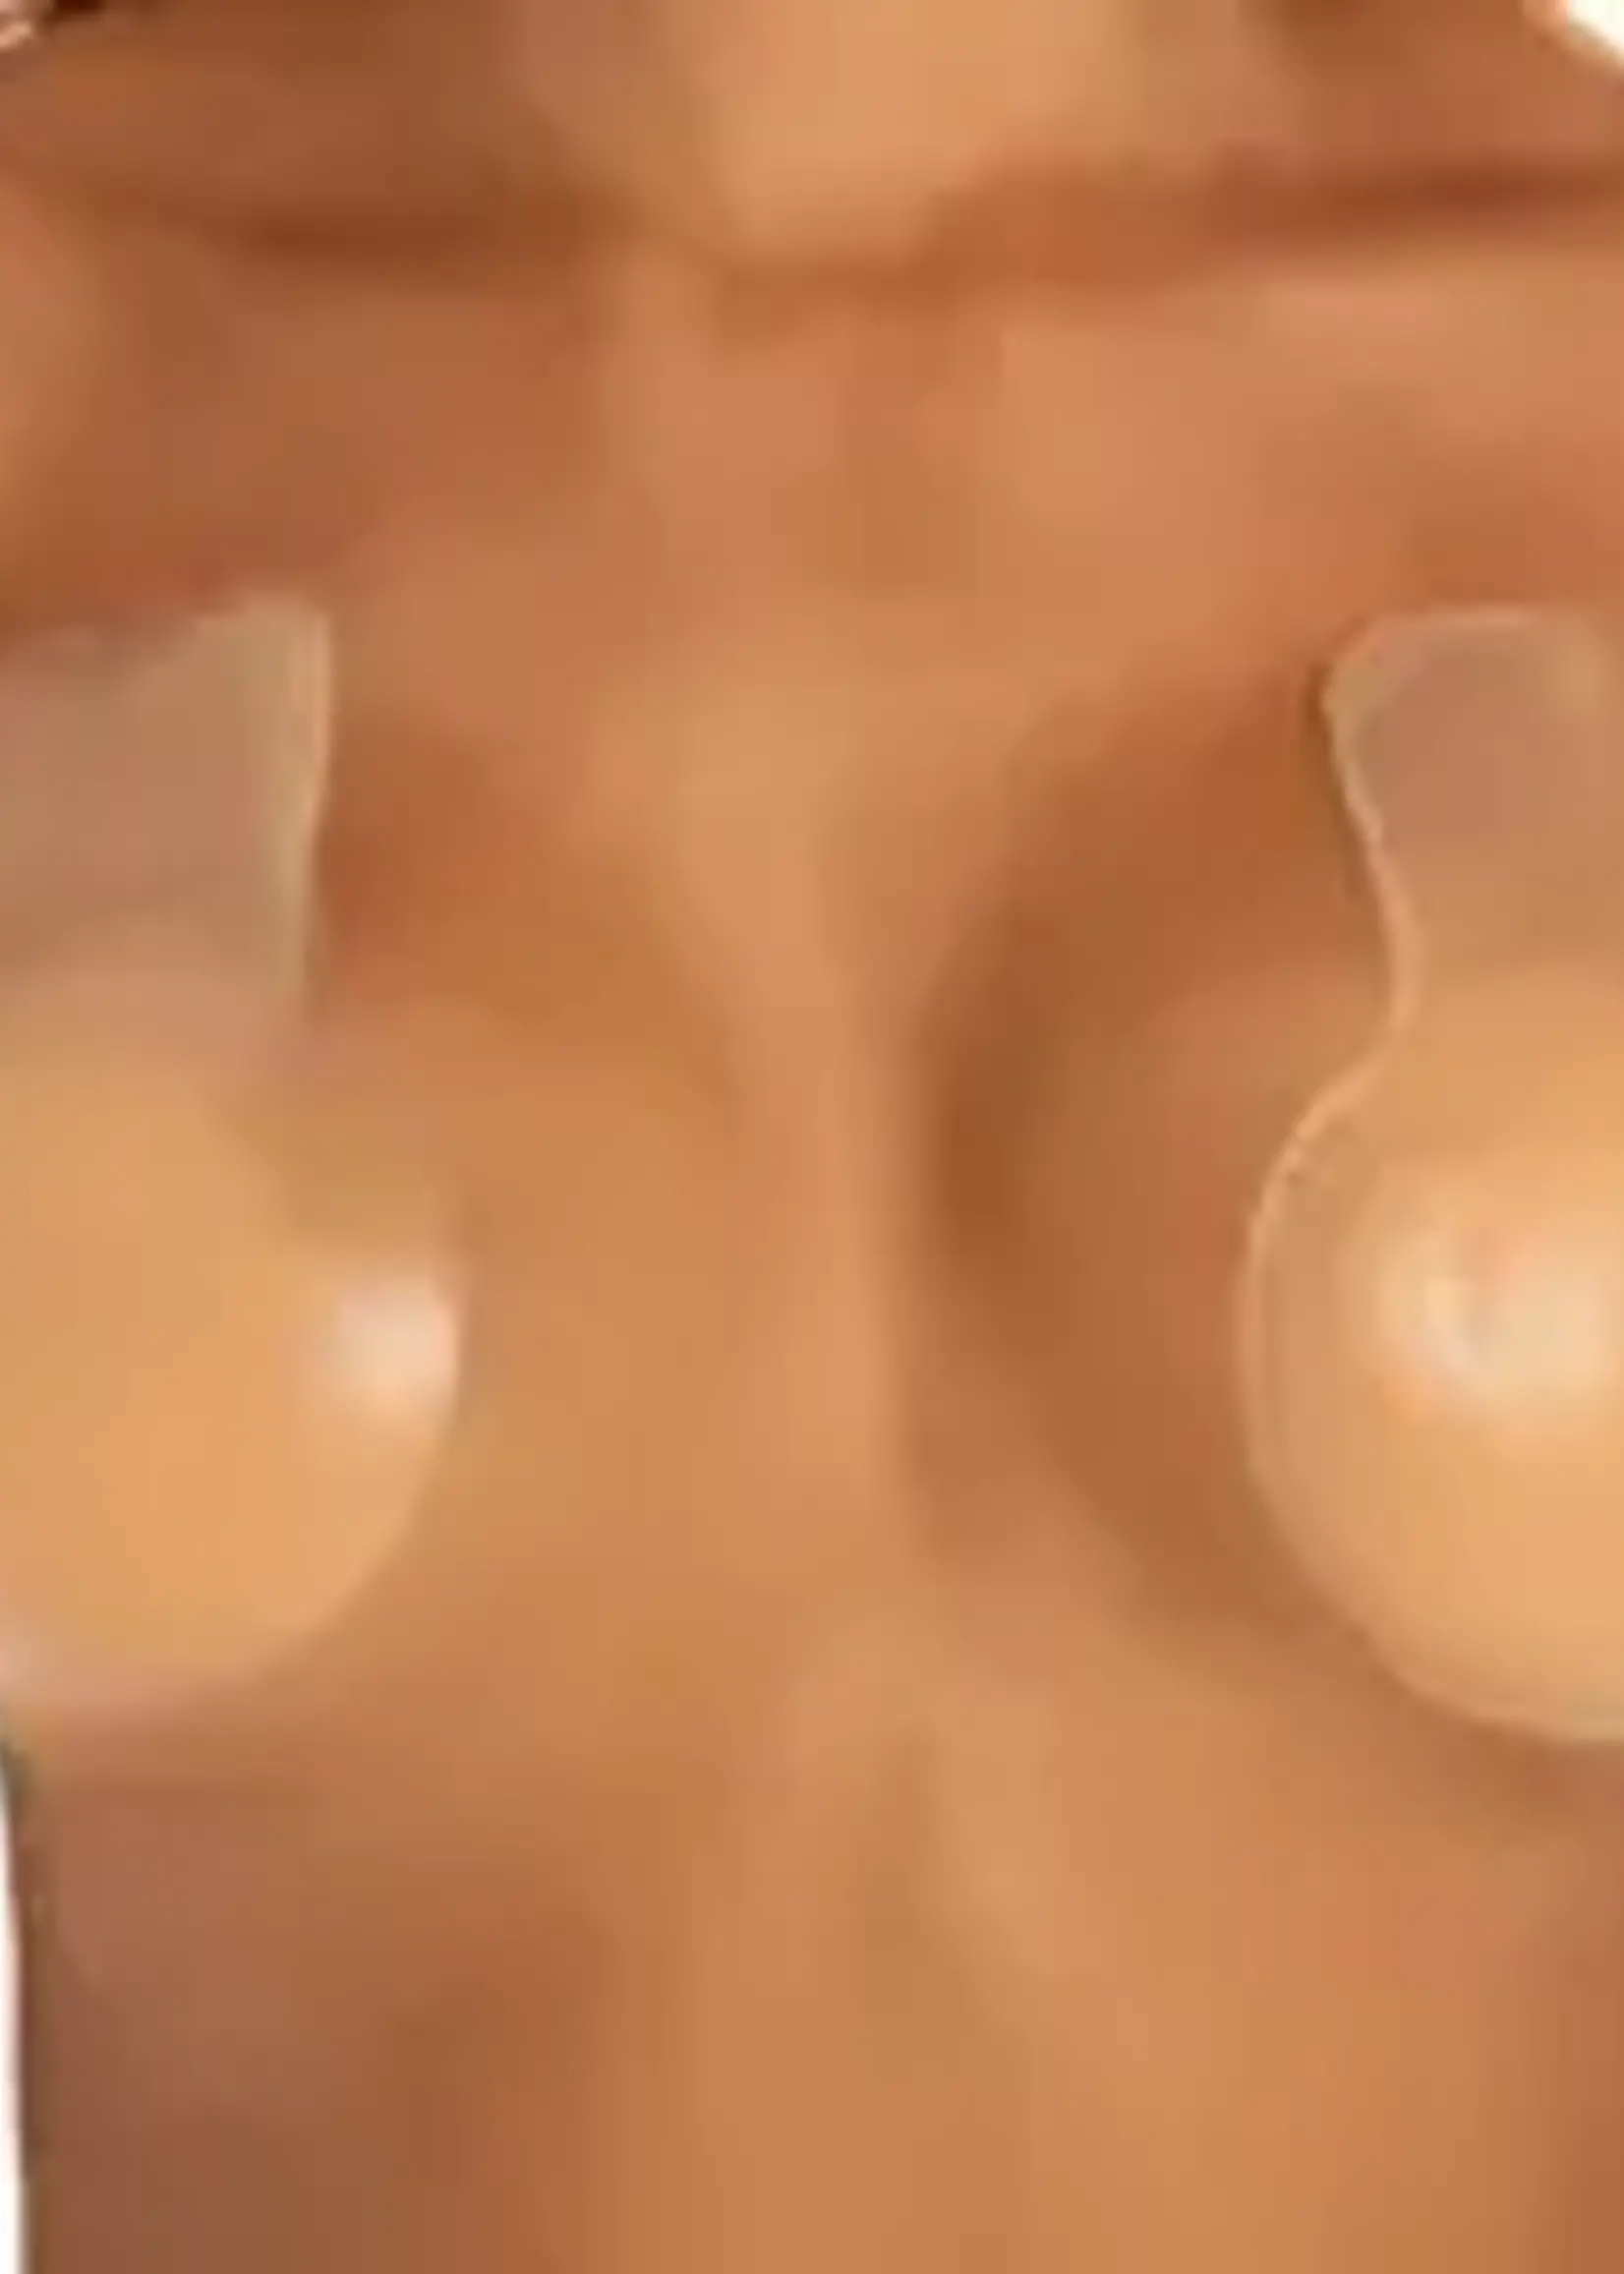 Secret Weapons Lift Ups - Breast lift nipple covers - Size A-D Cup